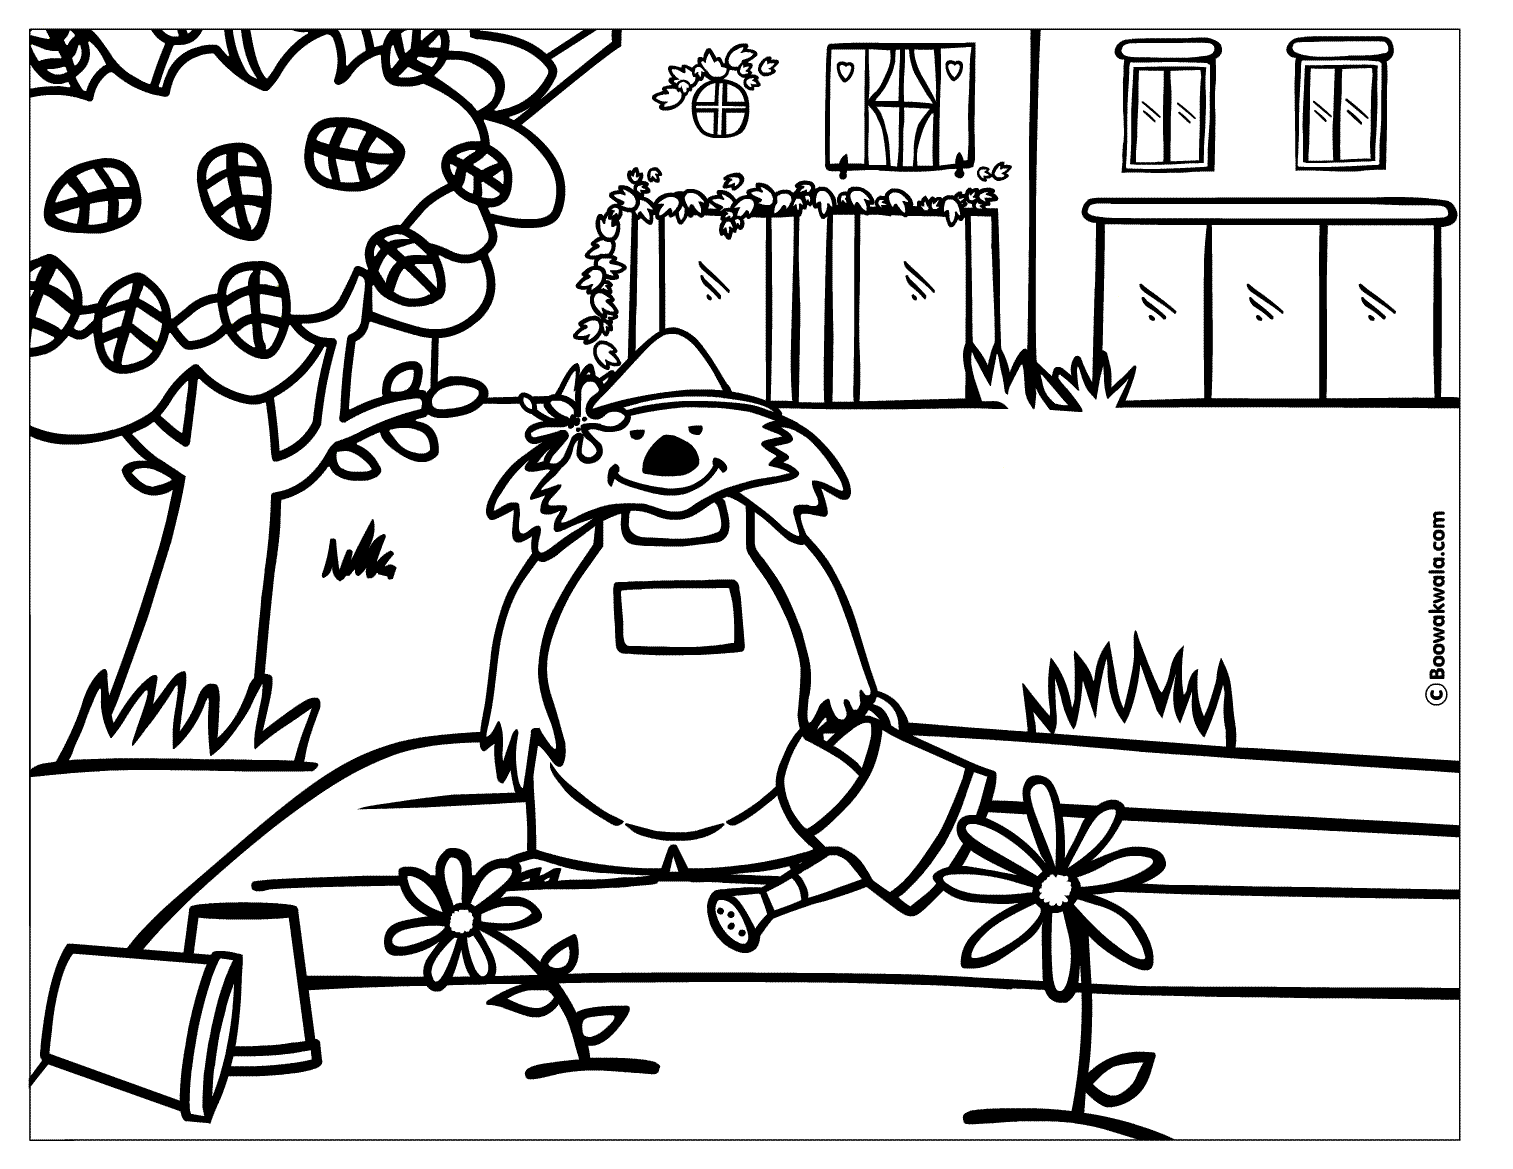 Coloring pages : Plant Coloring Page / picture / book / sheet